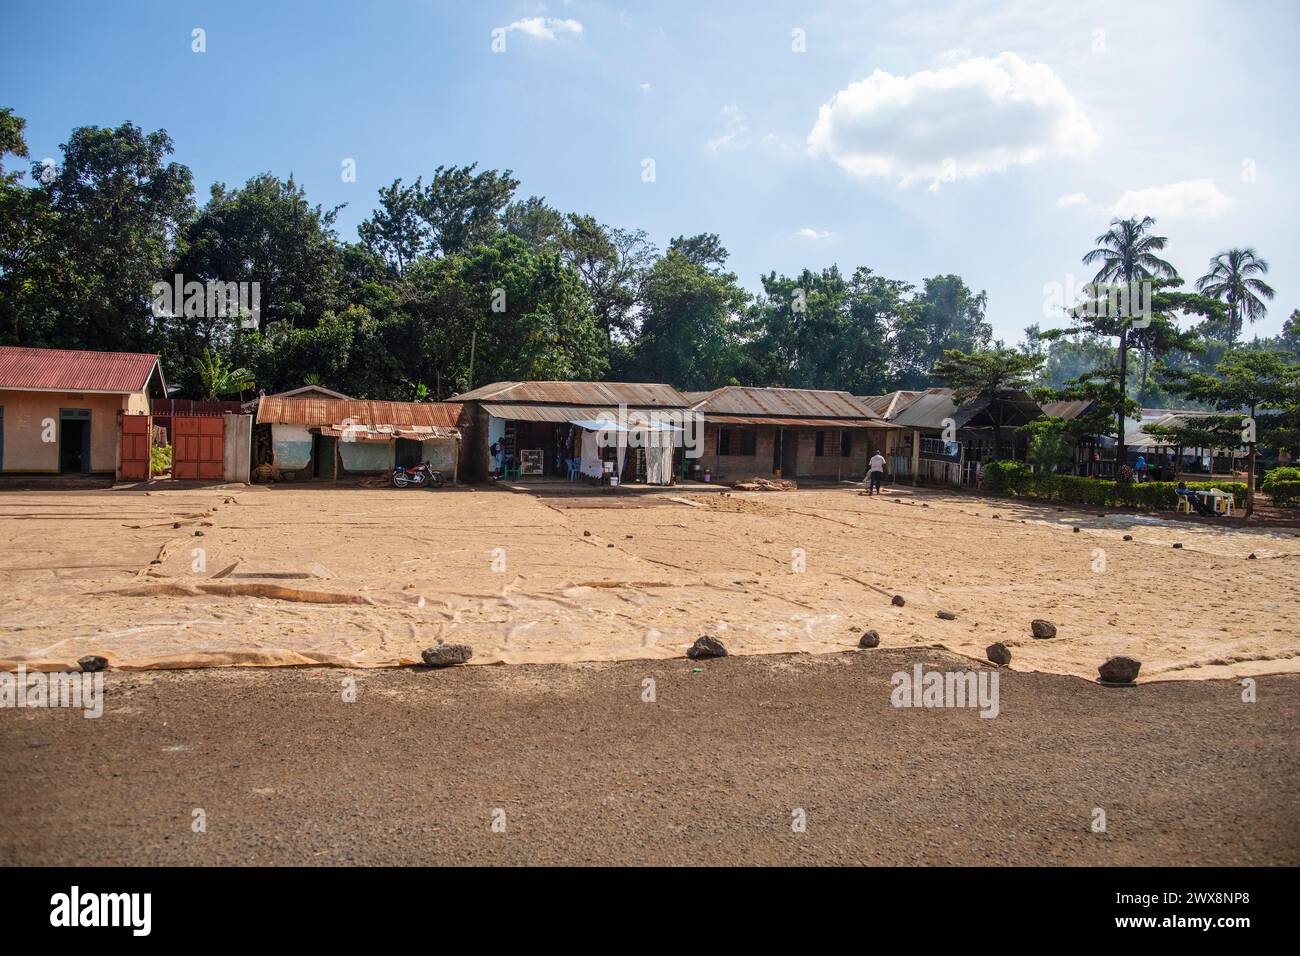 Arusha,Tanzania,Africa. 02 february 2022. near the house, rice was laid out for drying in the sun on large material Stock Photo